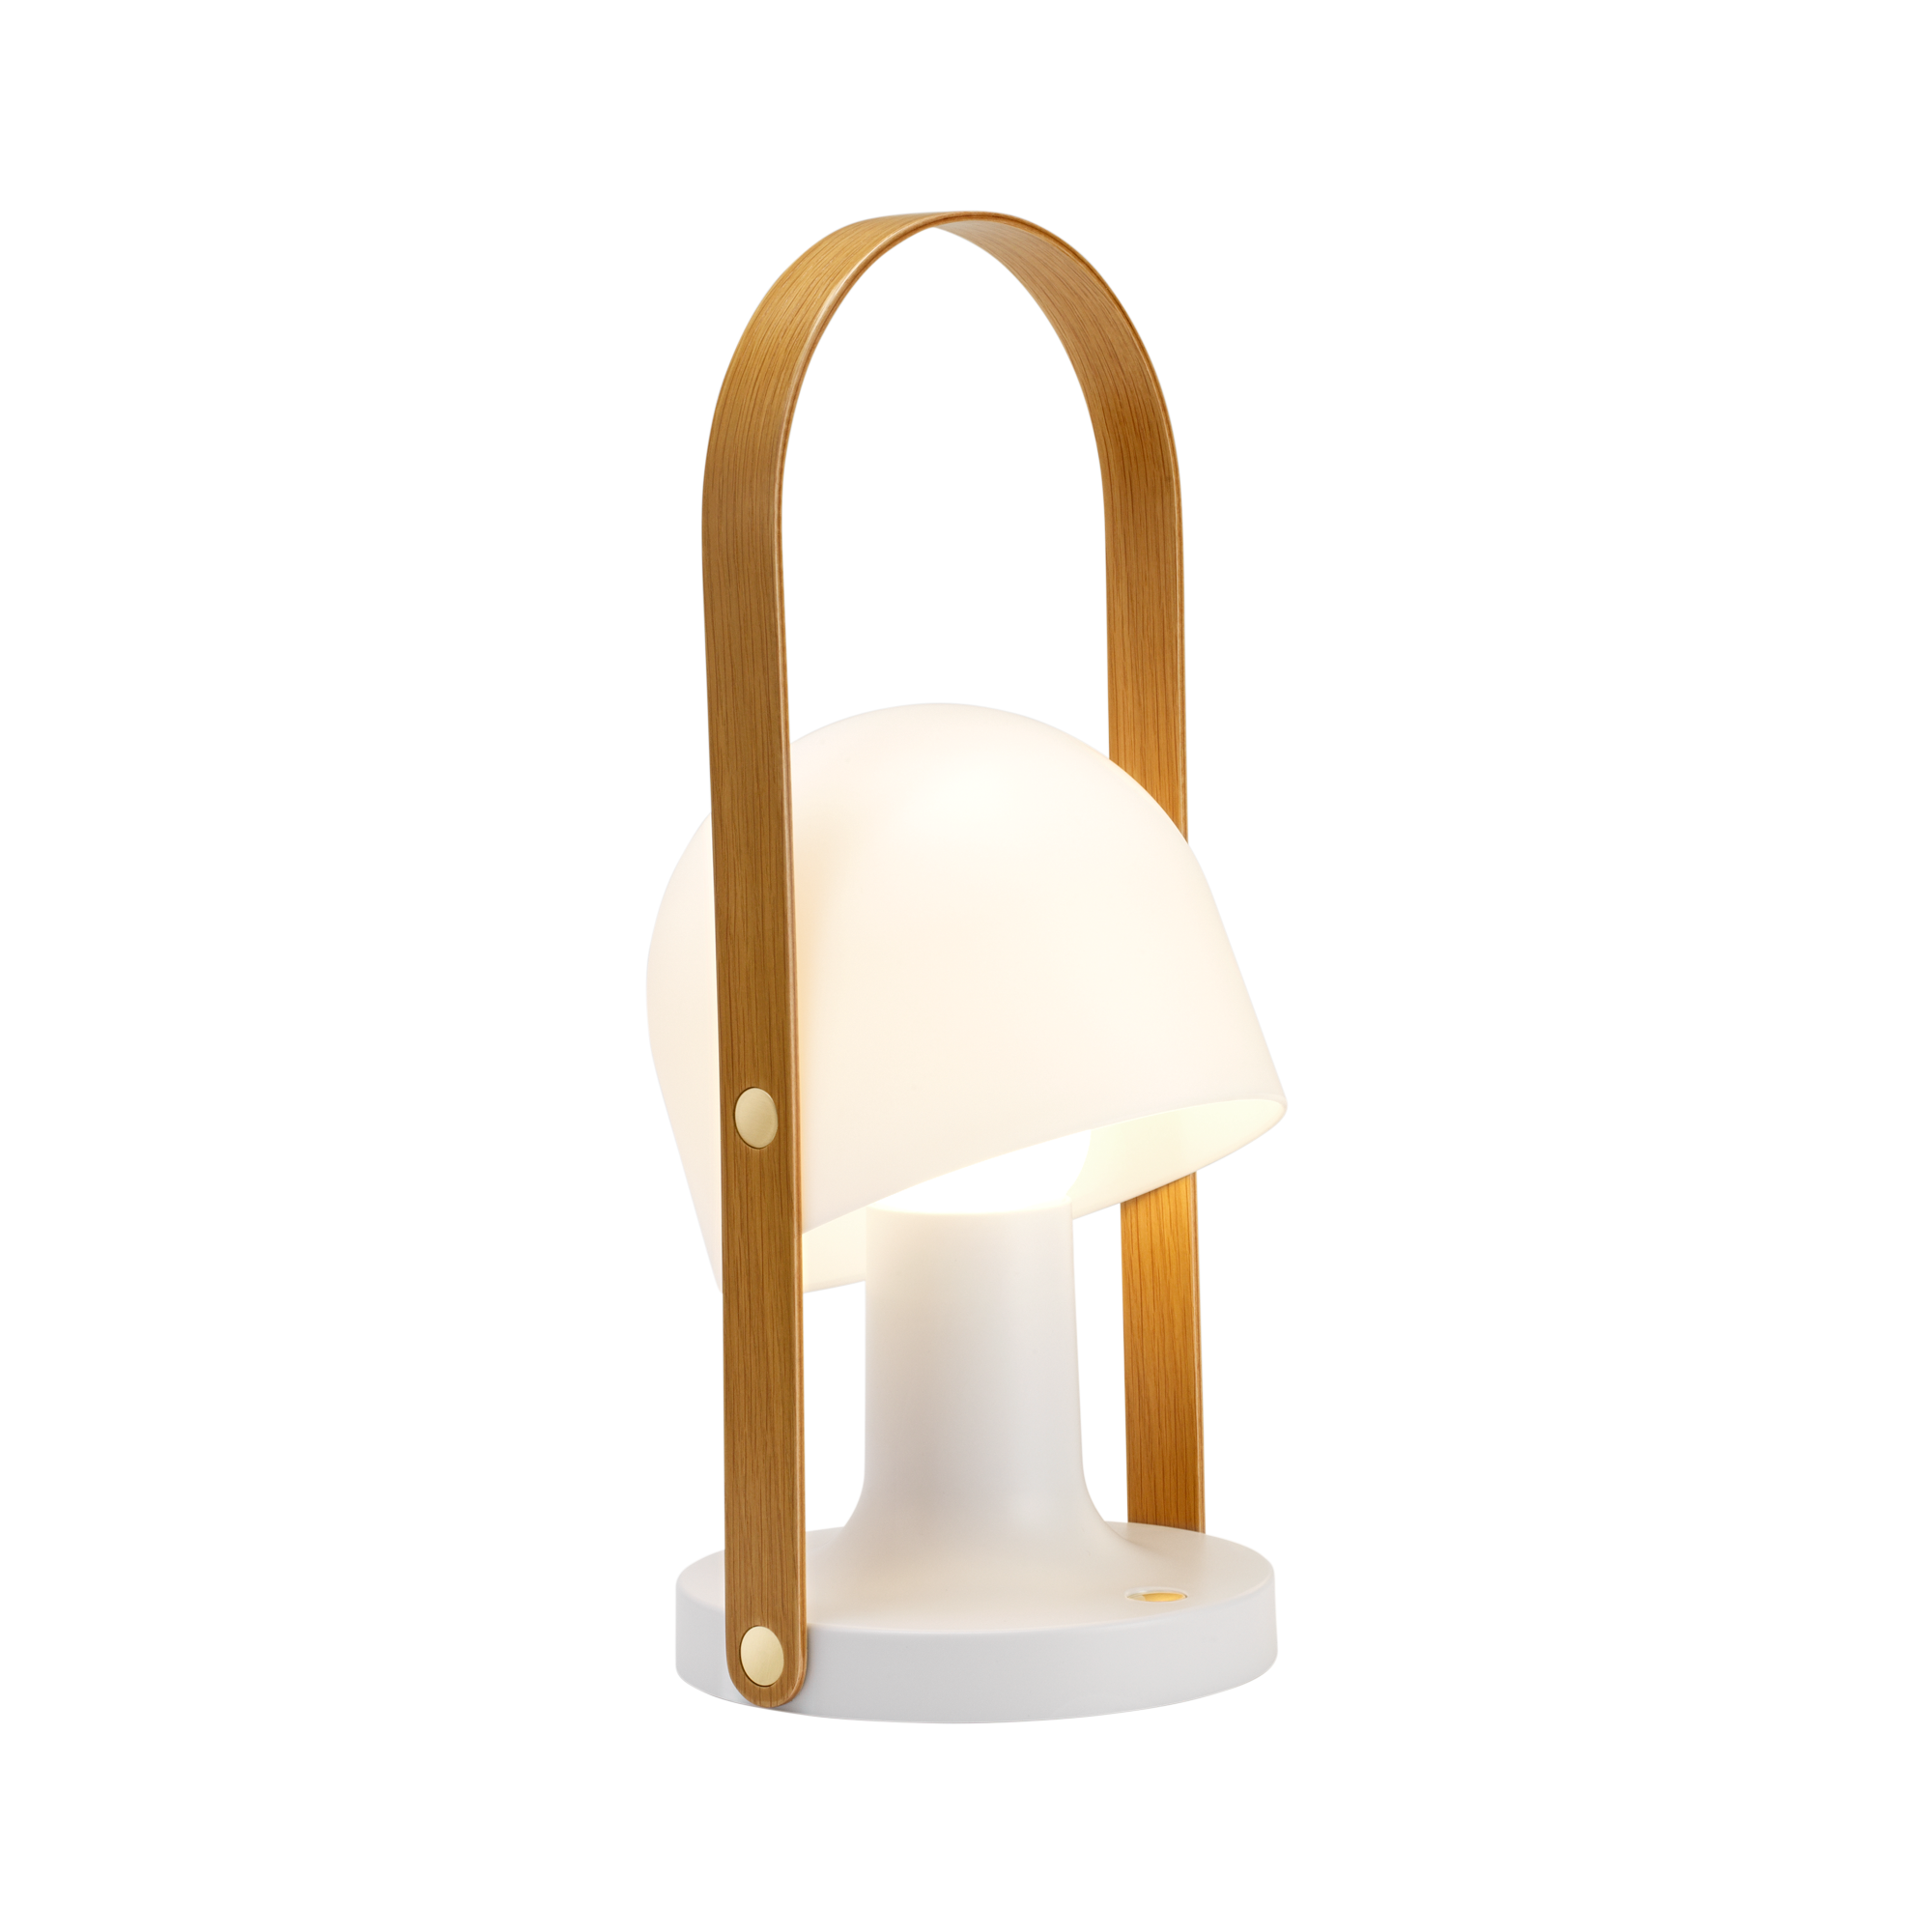 Small portable lamp with white mushroom shaped shade and bent wooden handle